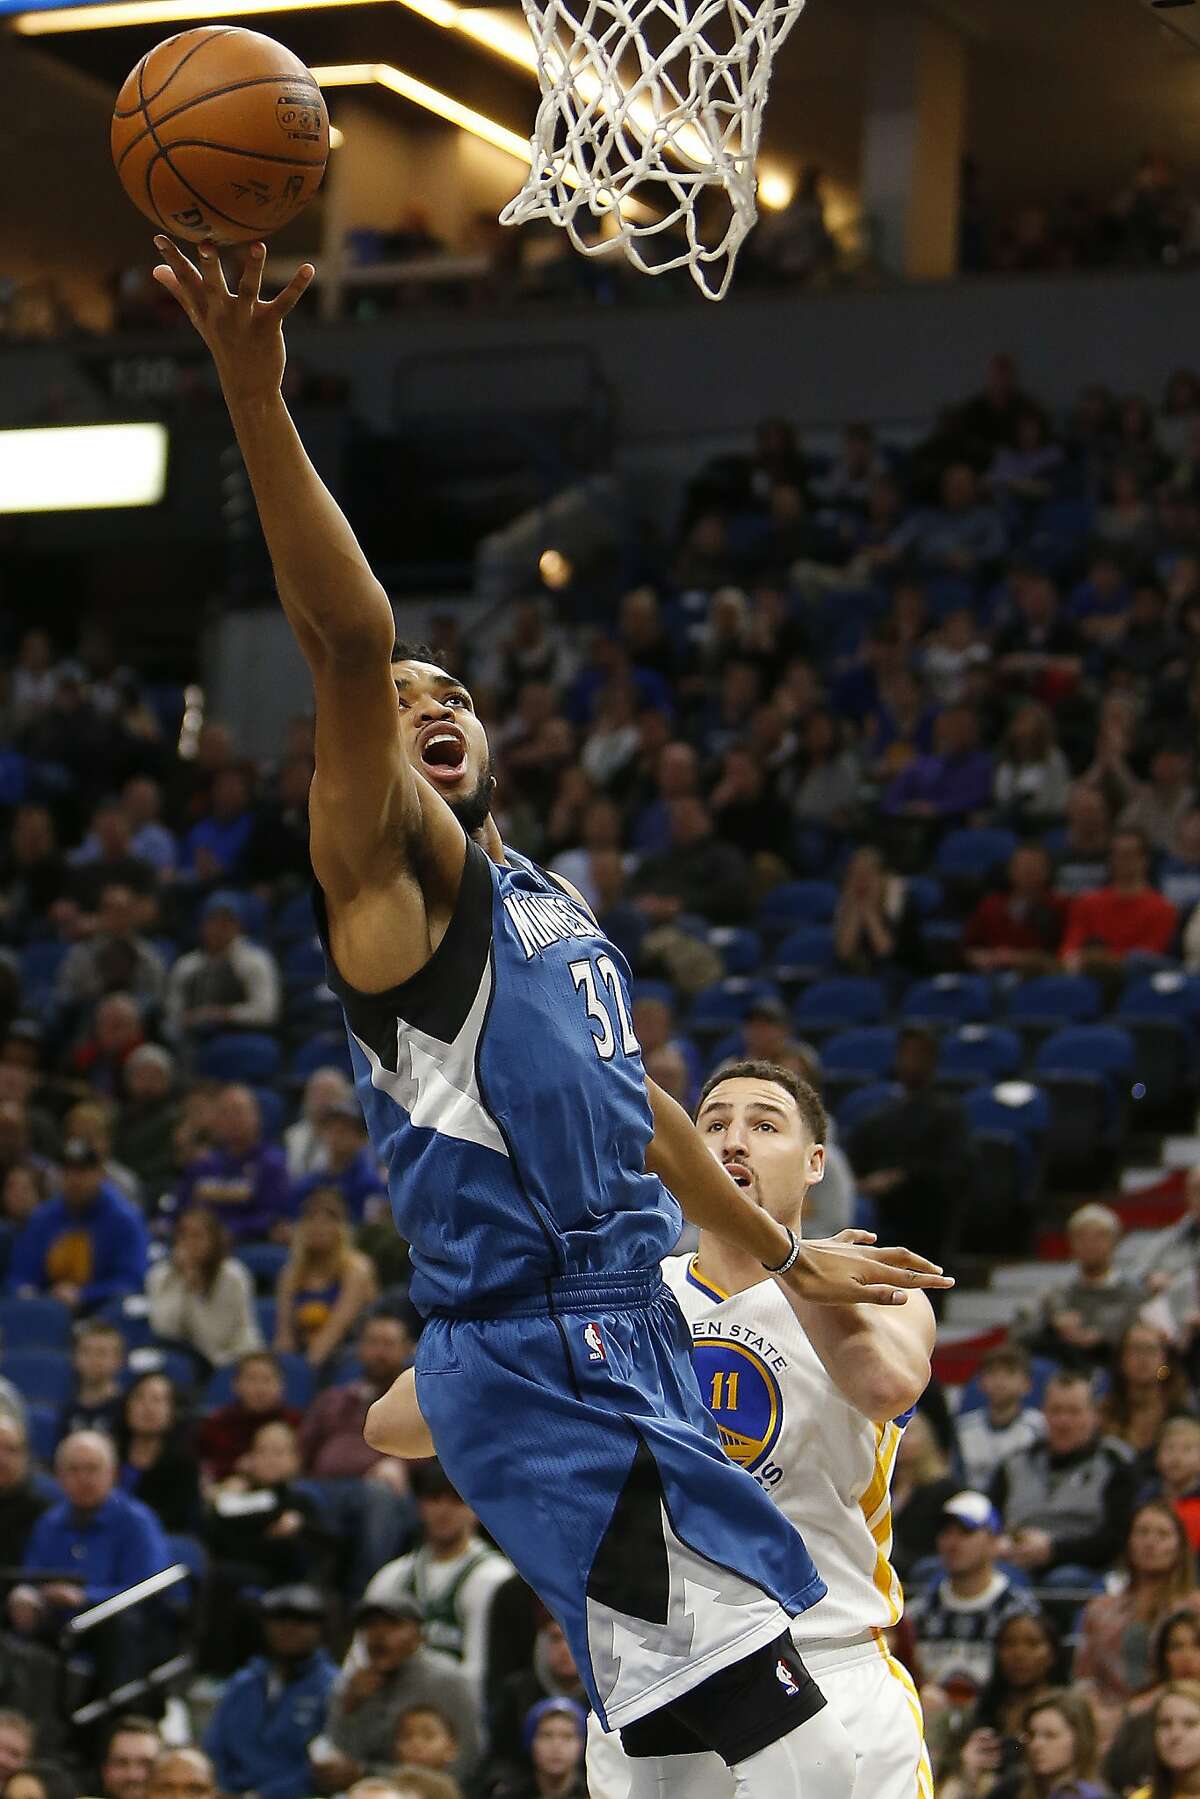 Minnesota Timberwolves center Karl-Anthony Towns (32) goes up to the basket past Golden State Warriors guard Klay Thompson (11) in the first half of an NBA basketball game, Sunday, Dec. 11, 2016, in Minneapolis. (AP Photo/Stacy Bengs)